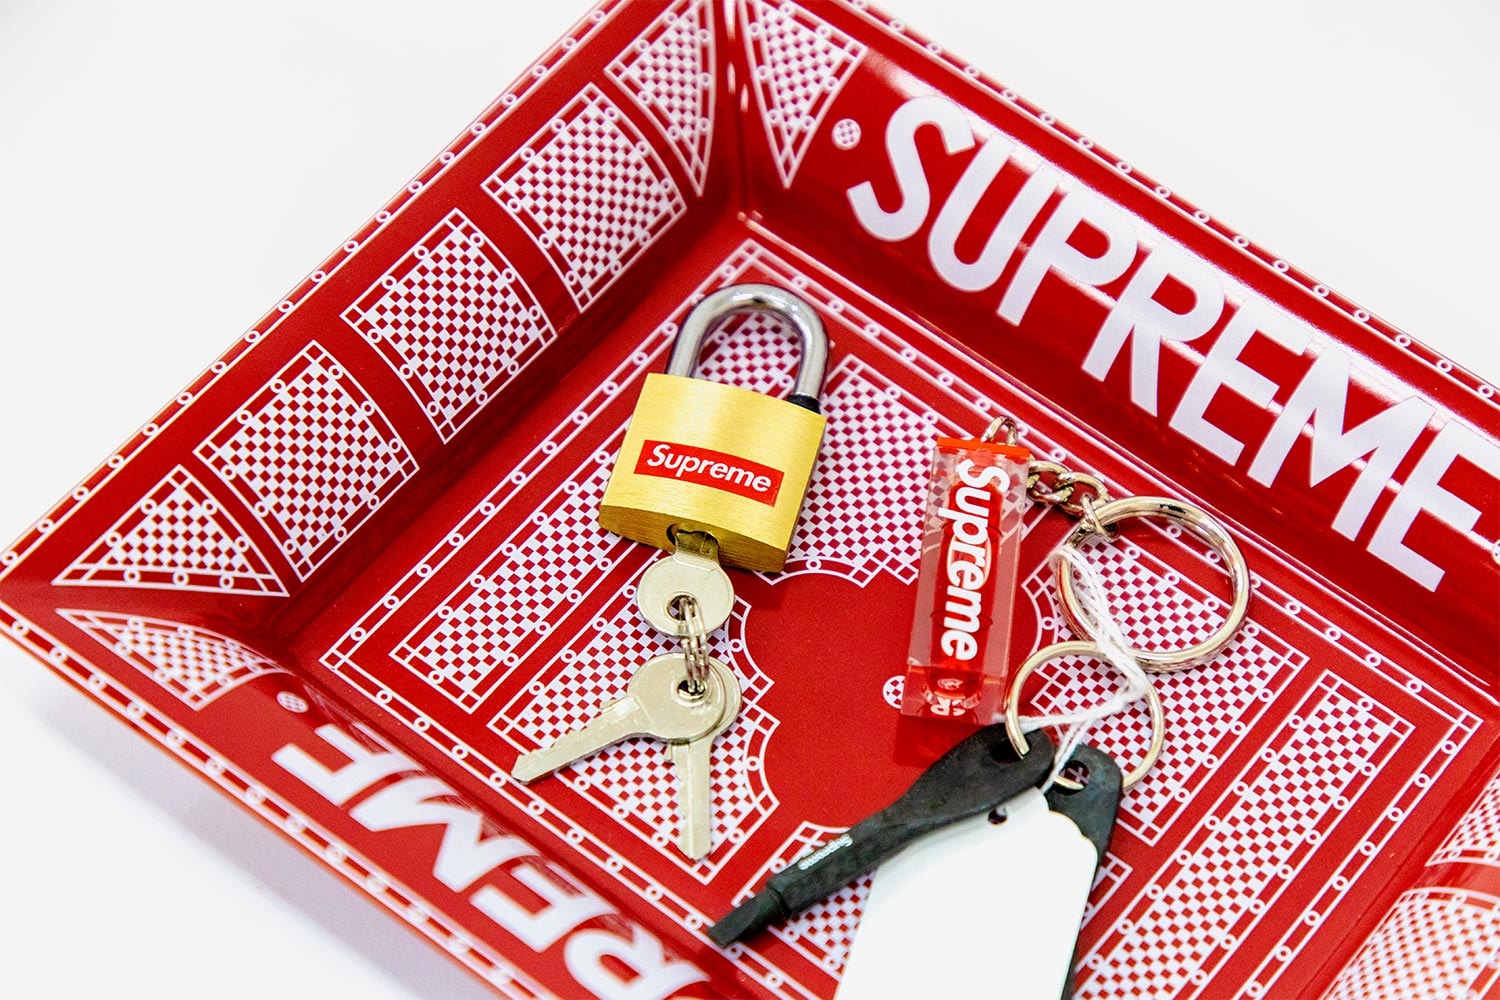 Sotheby's Supreme Accessories Auction News box logo skate new york louis vuitton punching bag edc scarface bogo stickers brick red anti hero B&O 